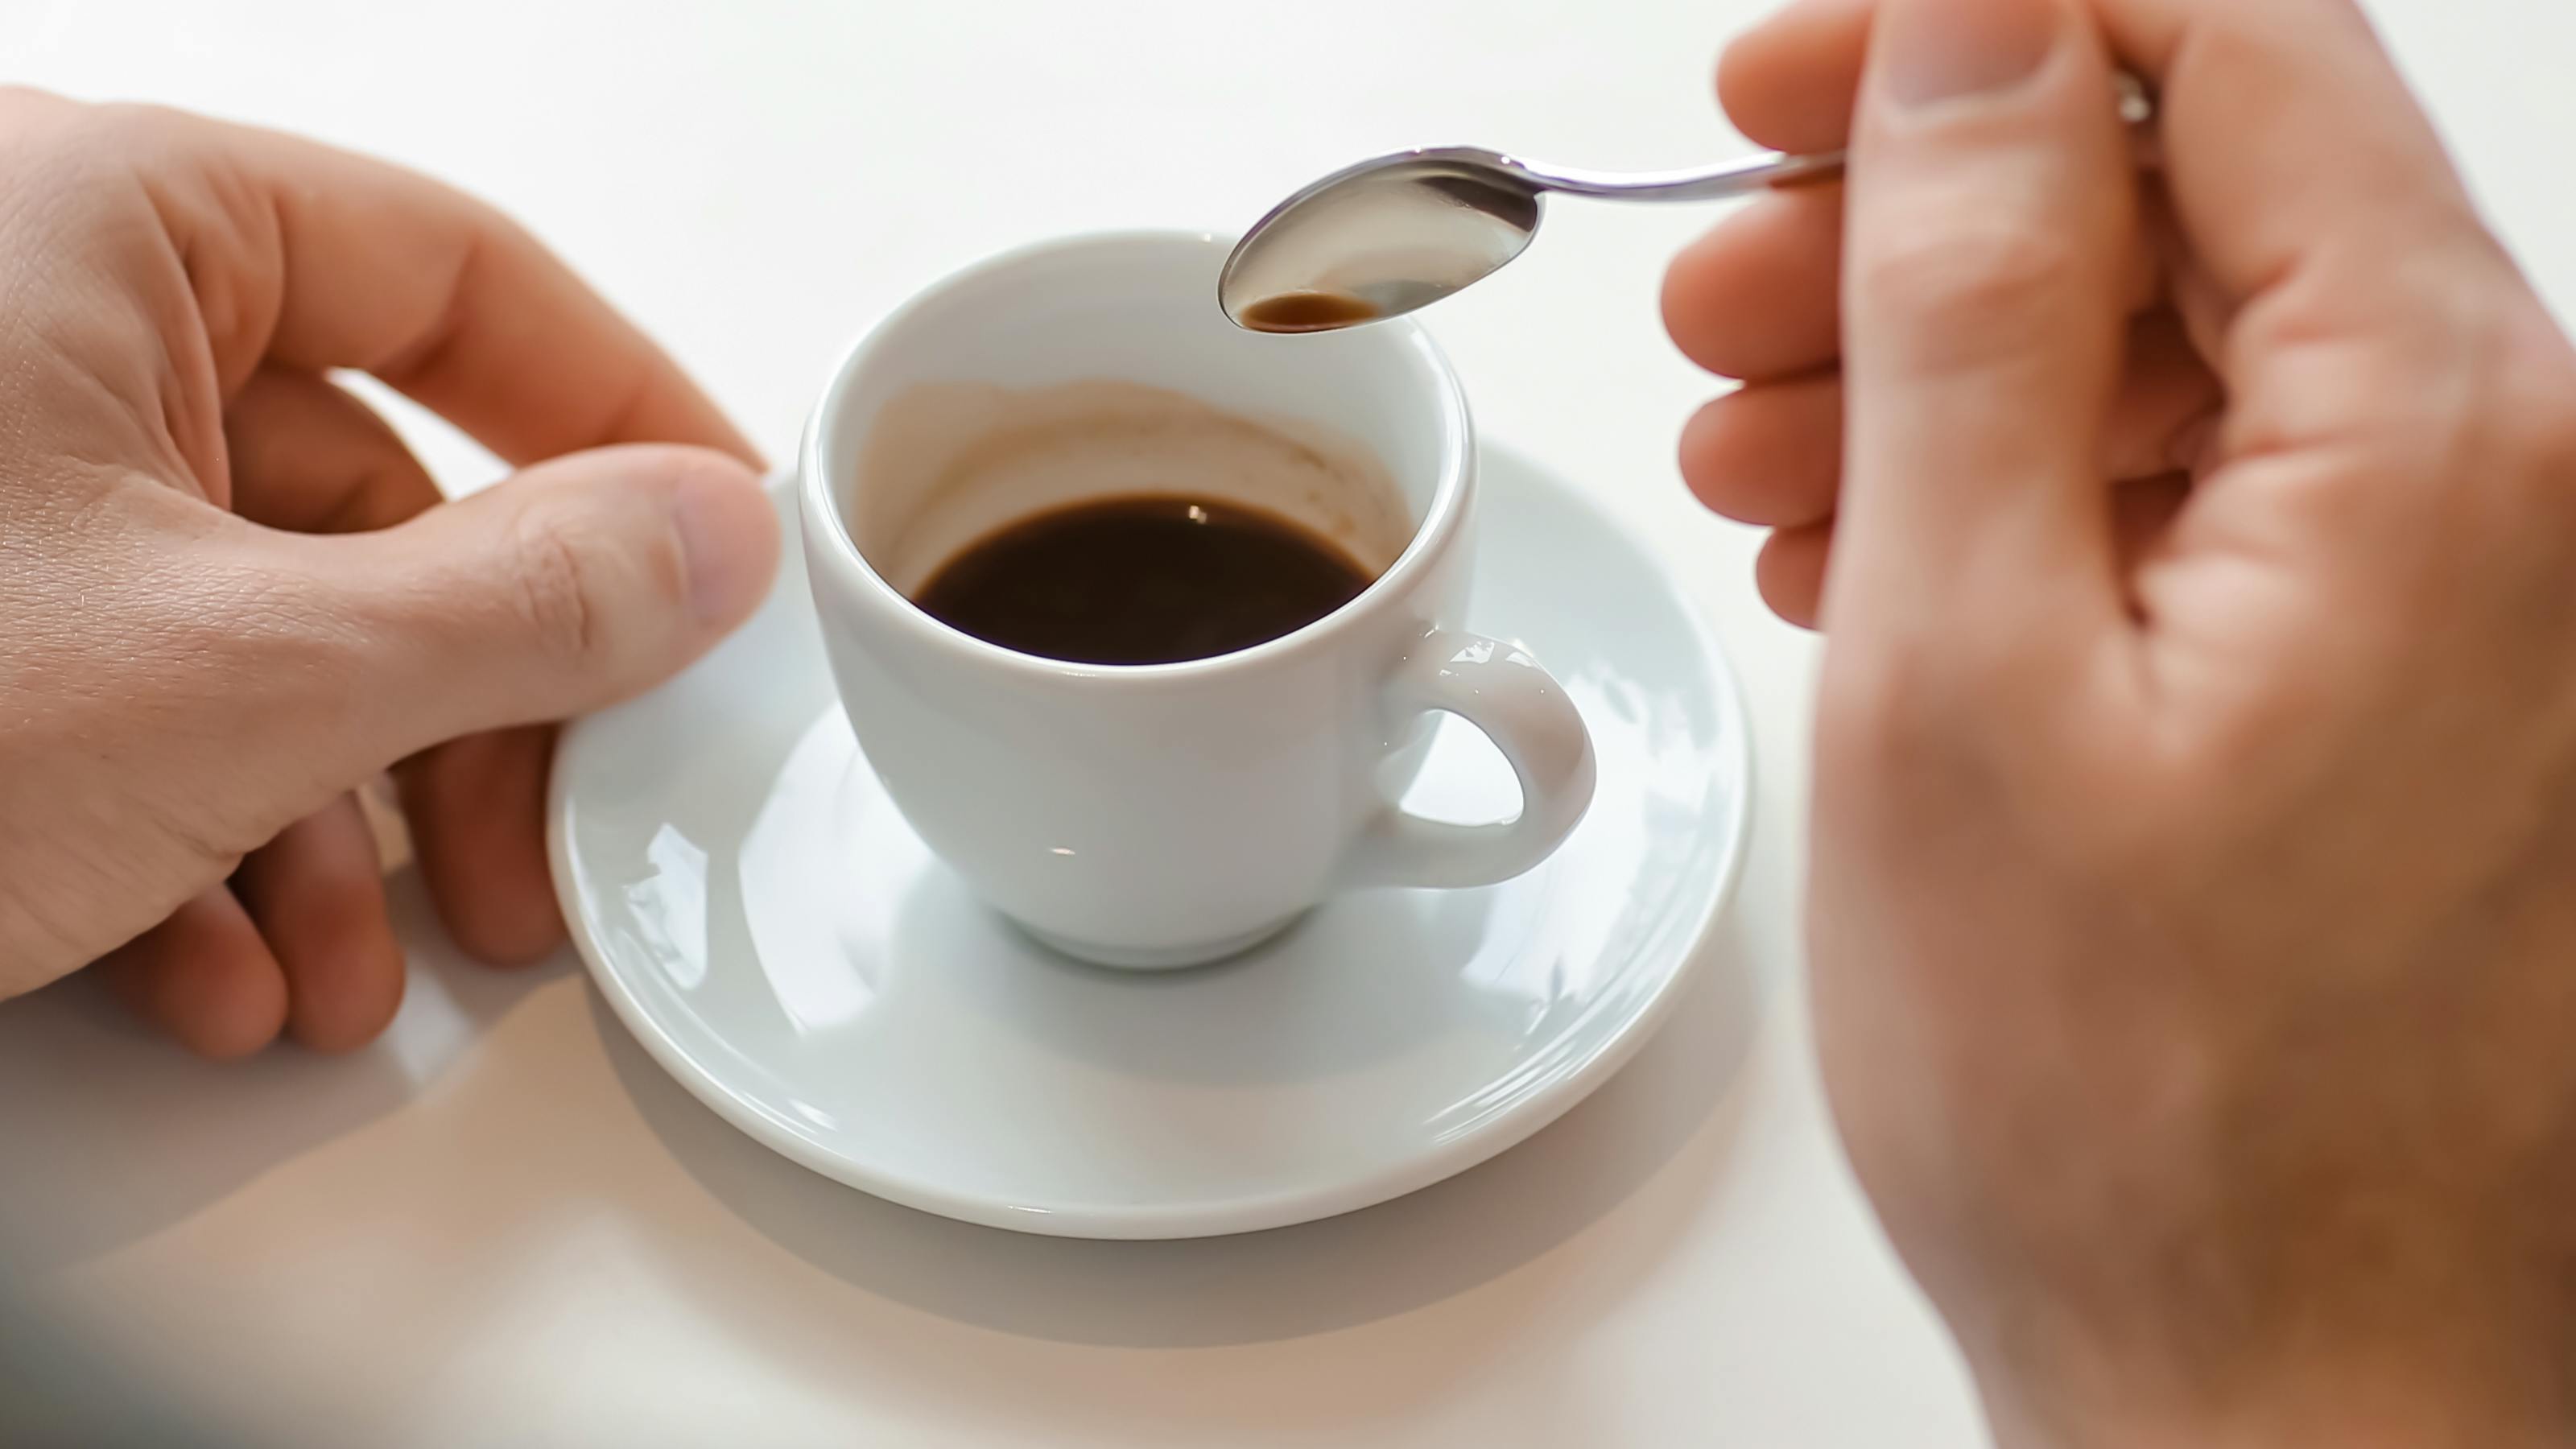 A cup of espresso on a white plate with a person holding a spoon over it. 